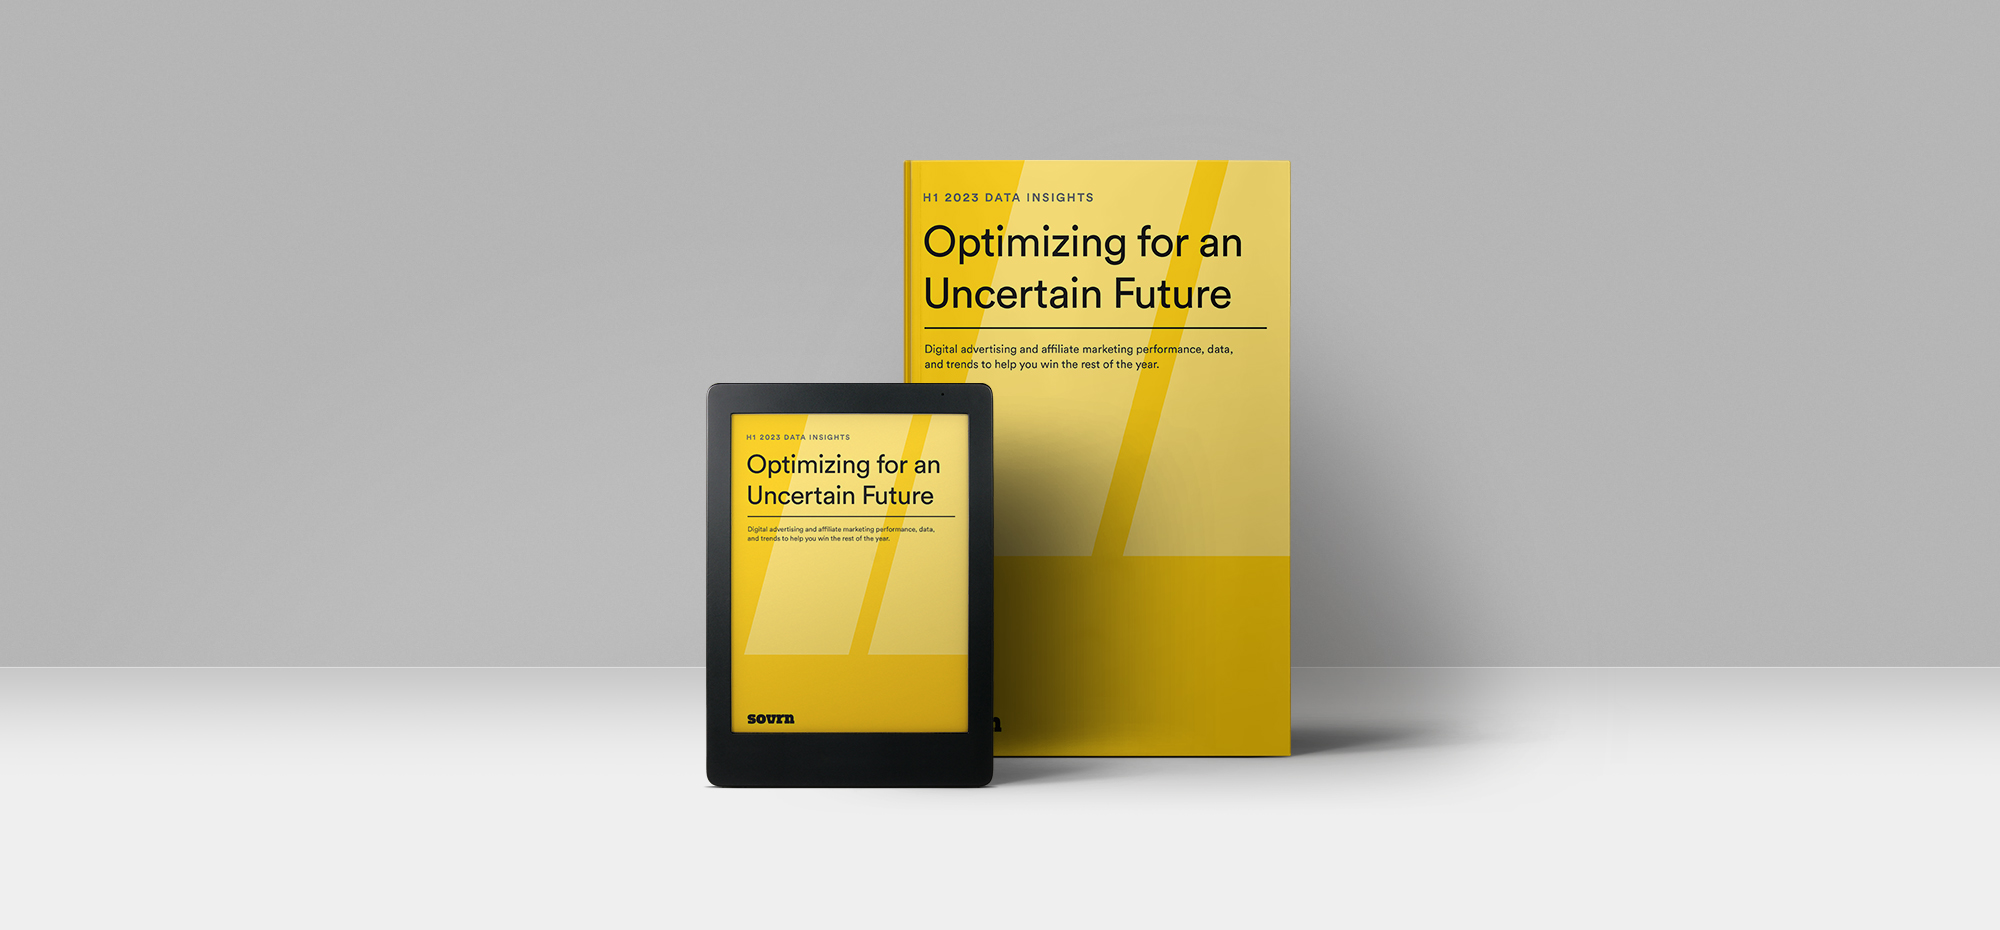 H1 2023 Industry Report: Optimize for Future Uncertainty with Data Insights